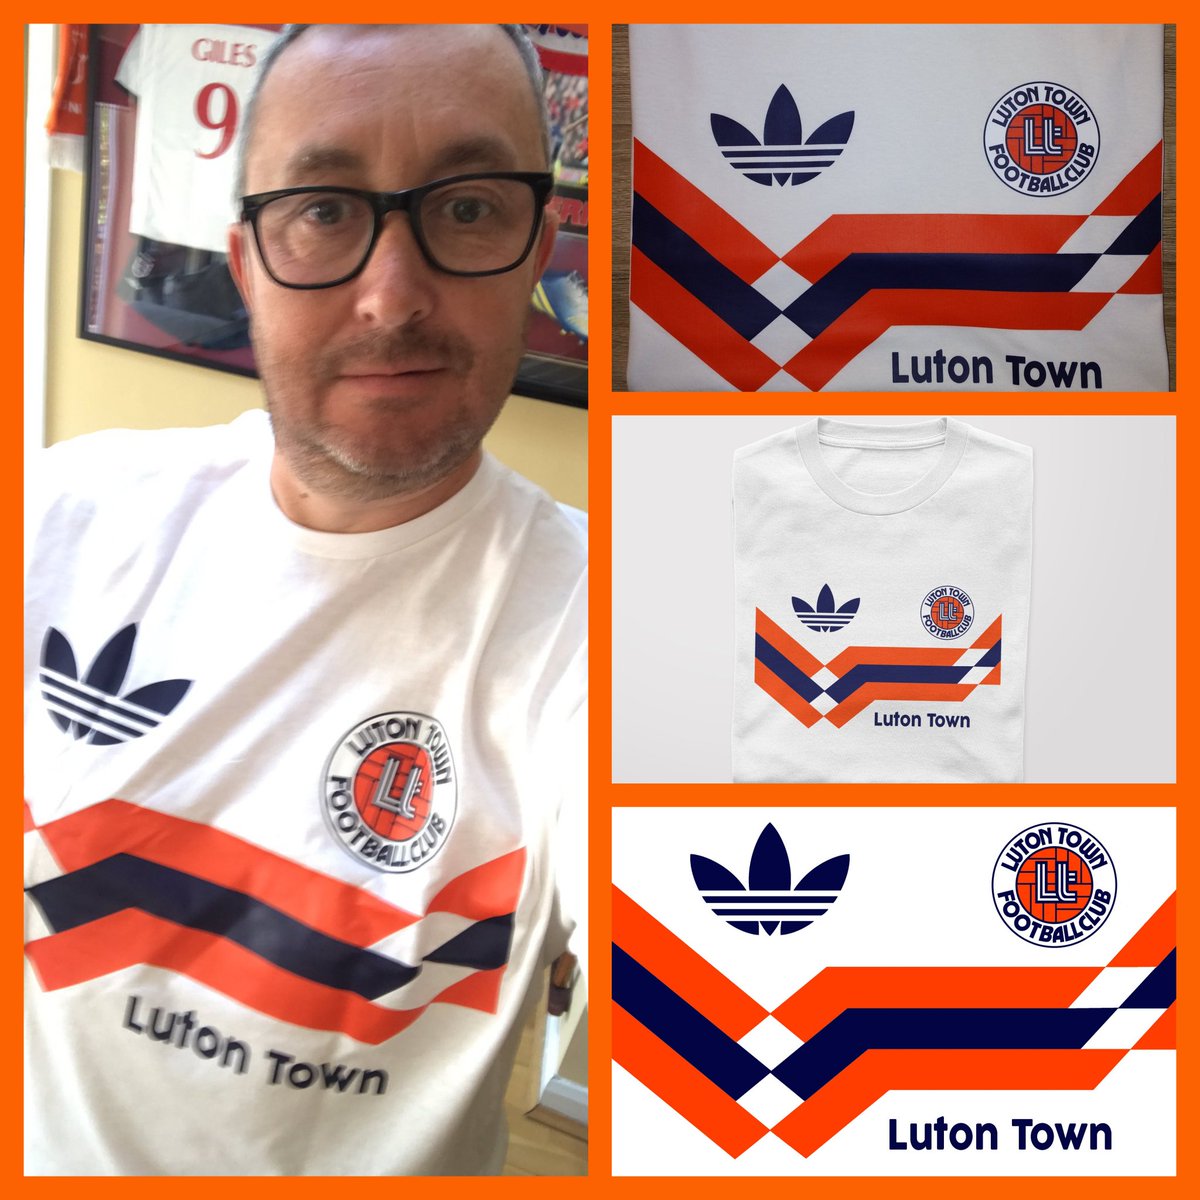 Supporters of the Premier League newbies are lapping this up!!
#lutontownfc #ltfc #thehatters #footballtee #italia90 #worldcup90